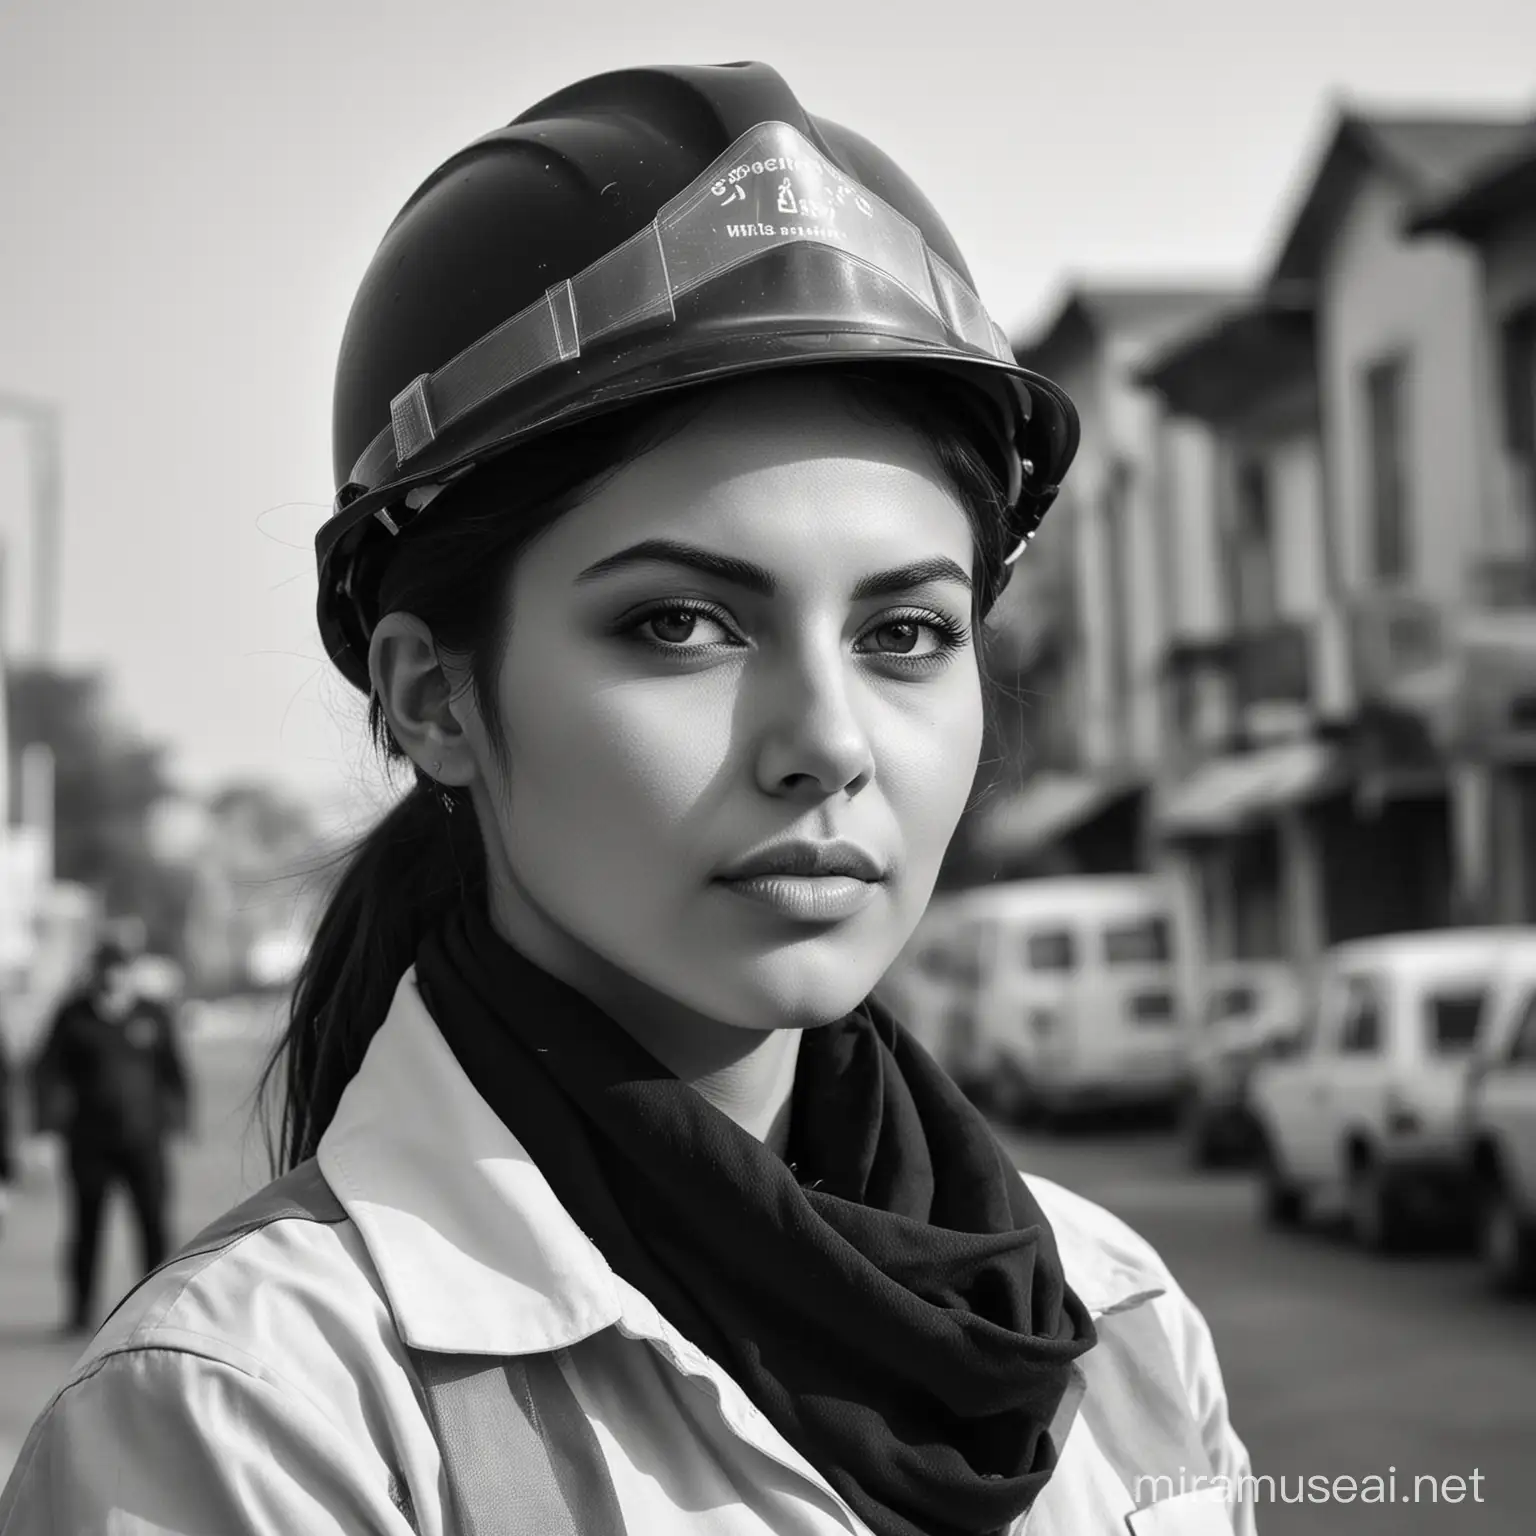 WOMEN SAFETY BLACK AND WHITE


